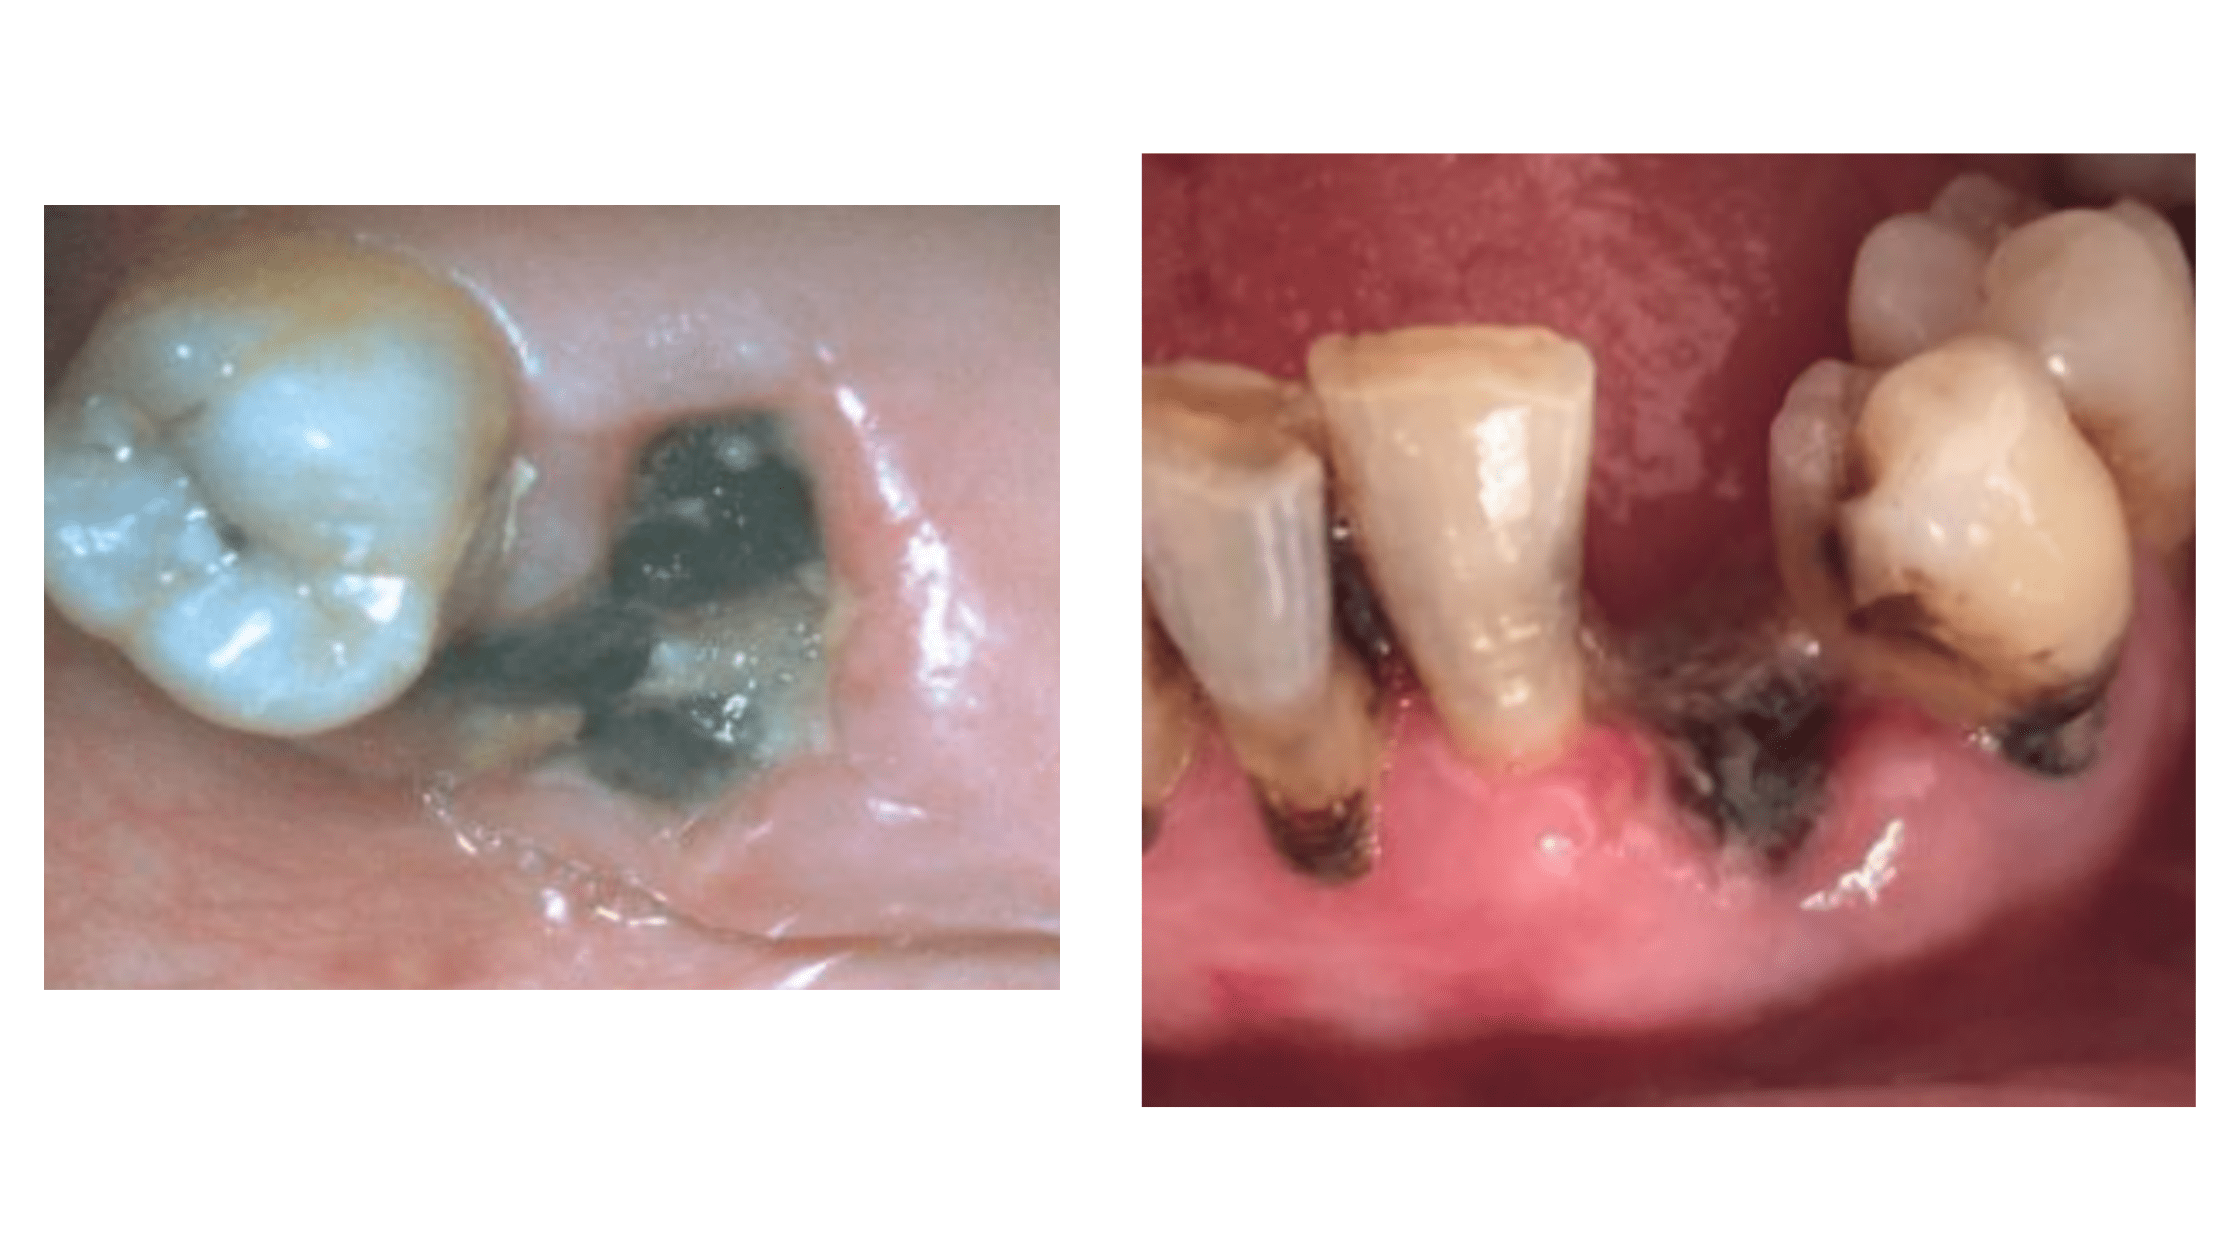 Socket Infection After Tooth Extraction: What You Should Know